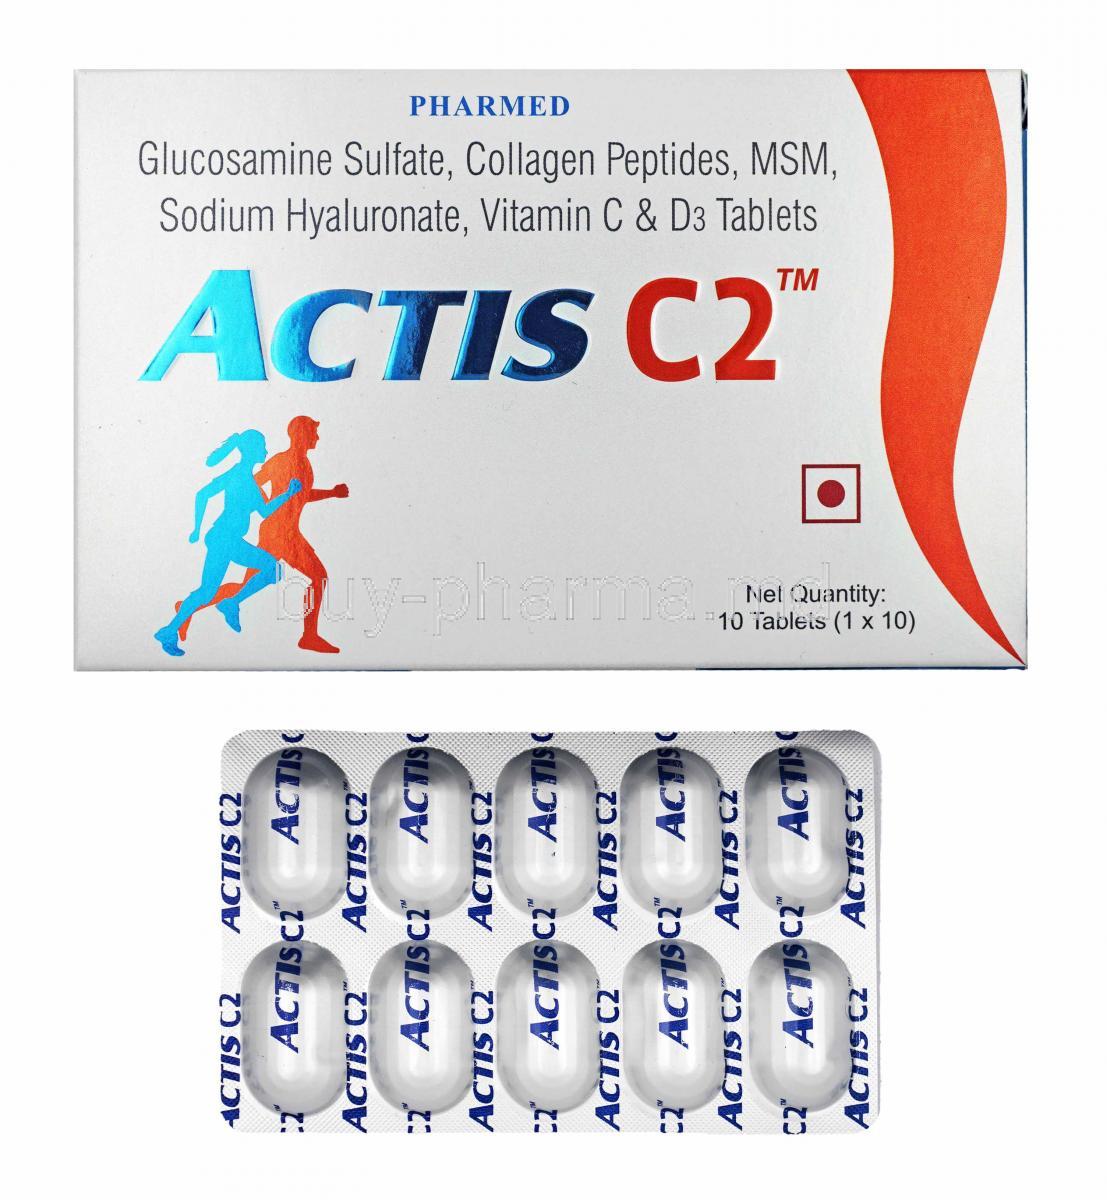 Actis C2 box and tablets